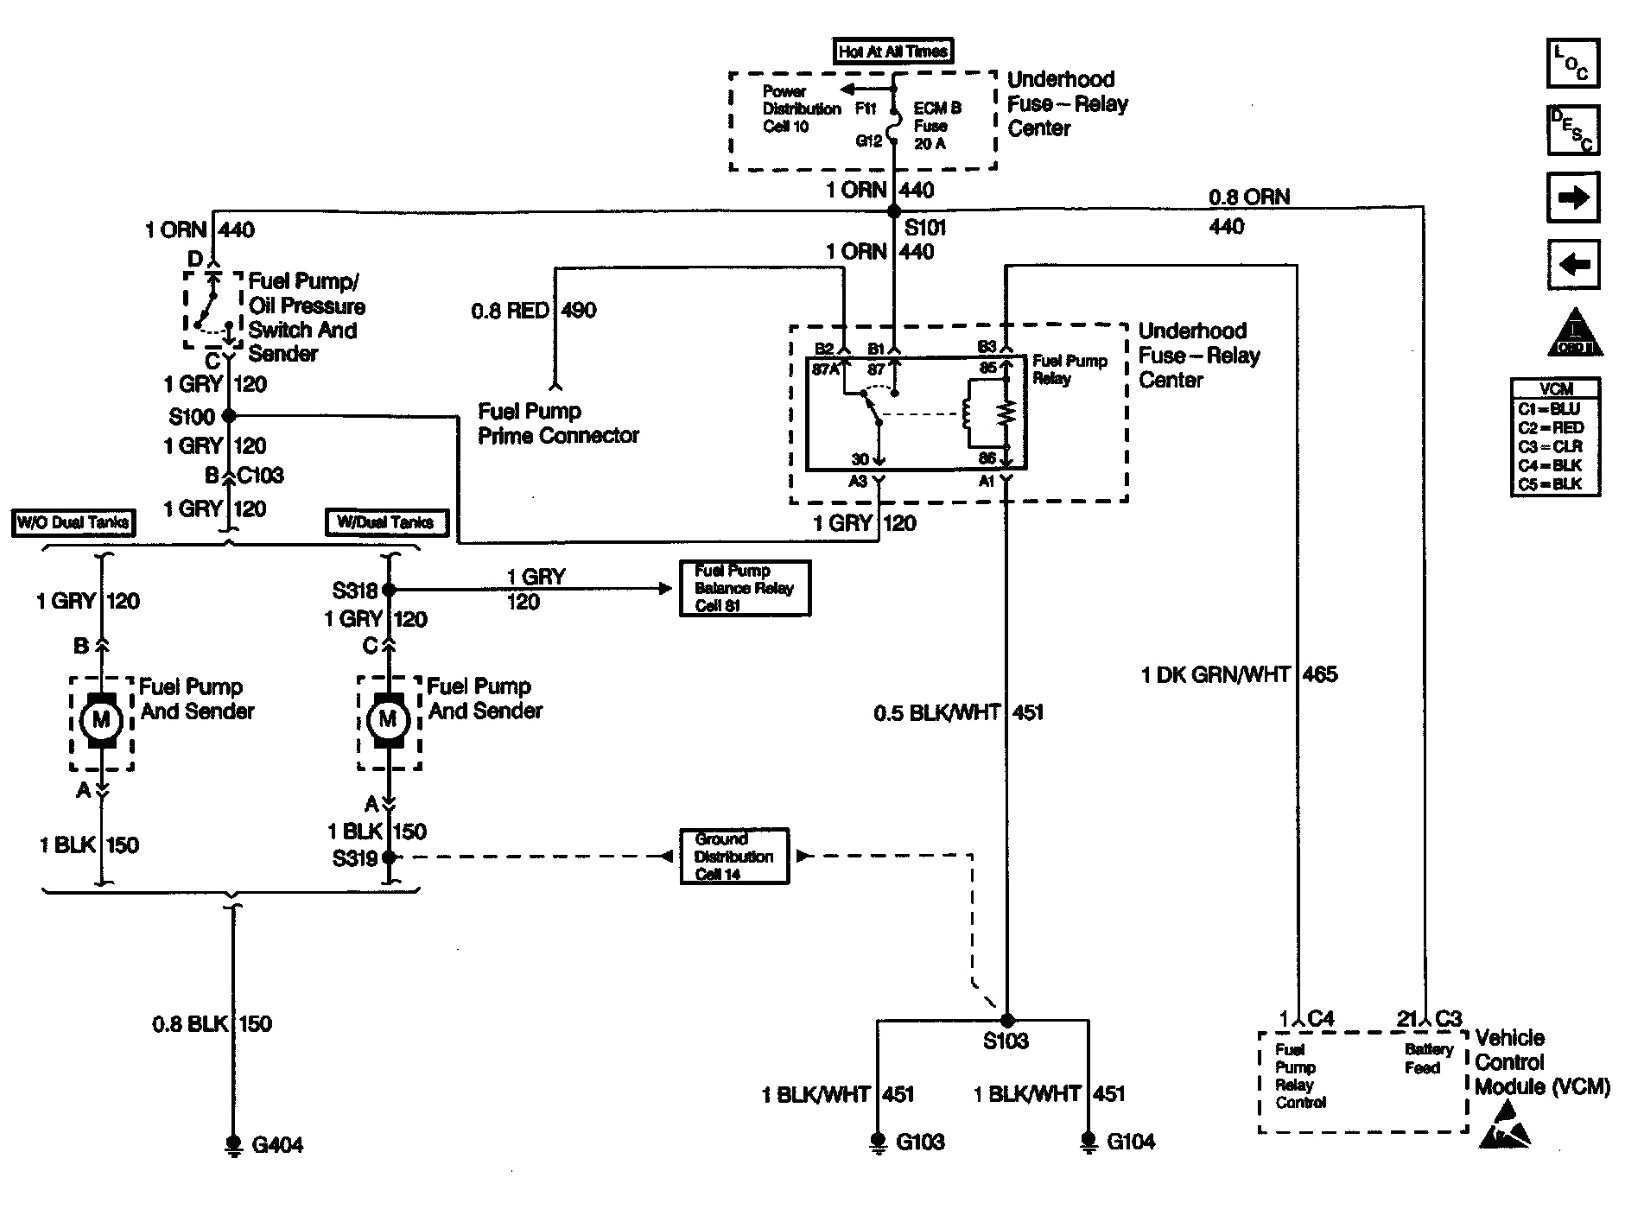 Chevy S10 Wiring Diagram 1998 Chevy S10 Fuel Pump Wiring Diagram Wiring Diagram Used Of Chevy S10 Wiring Diagram